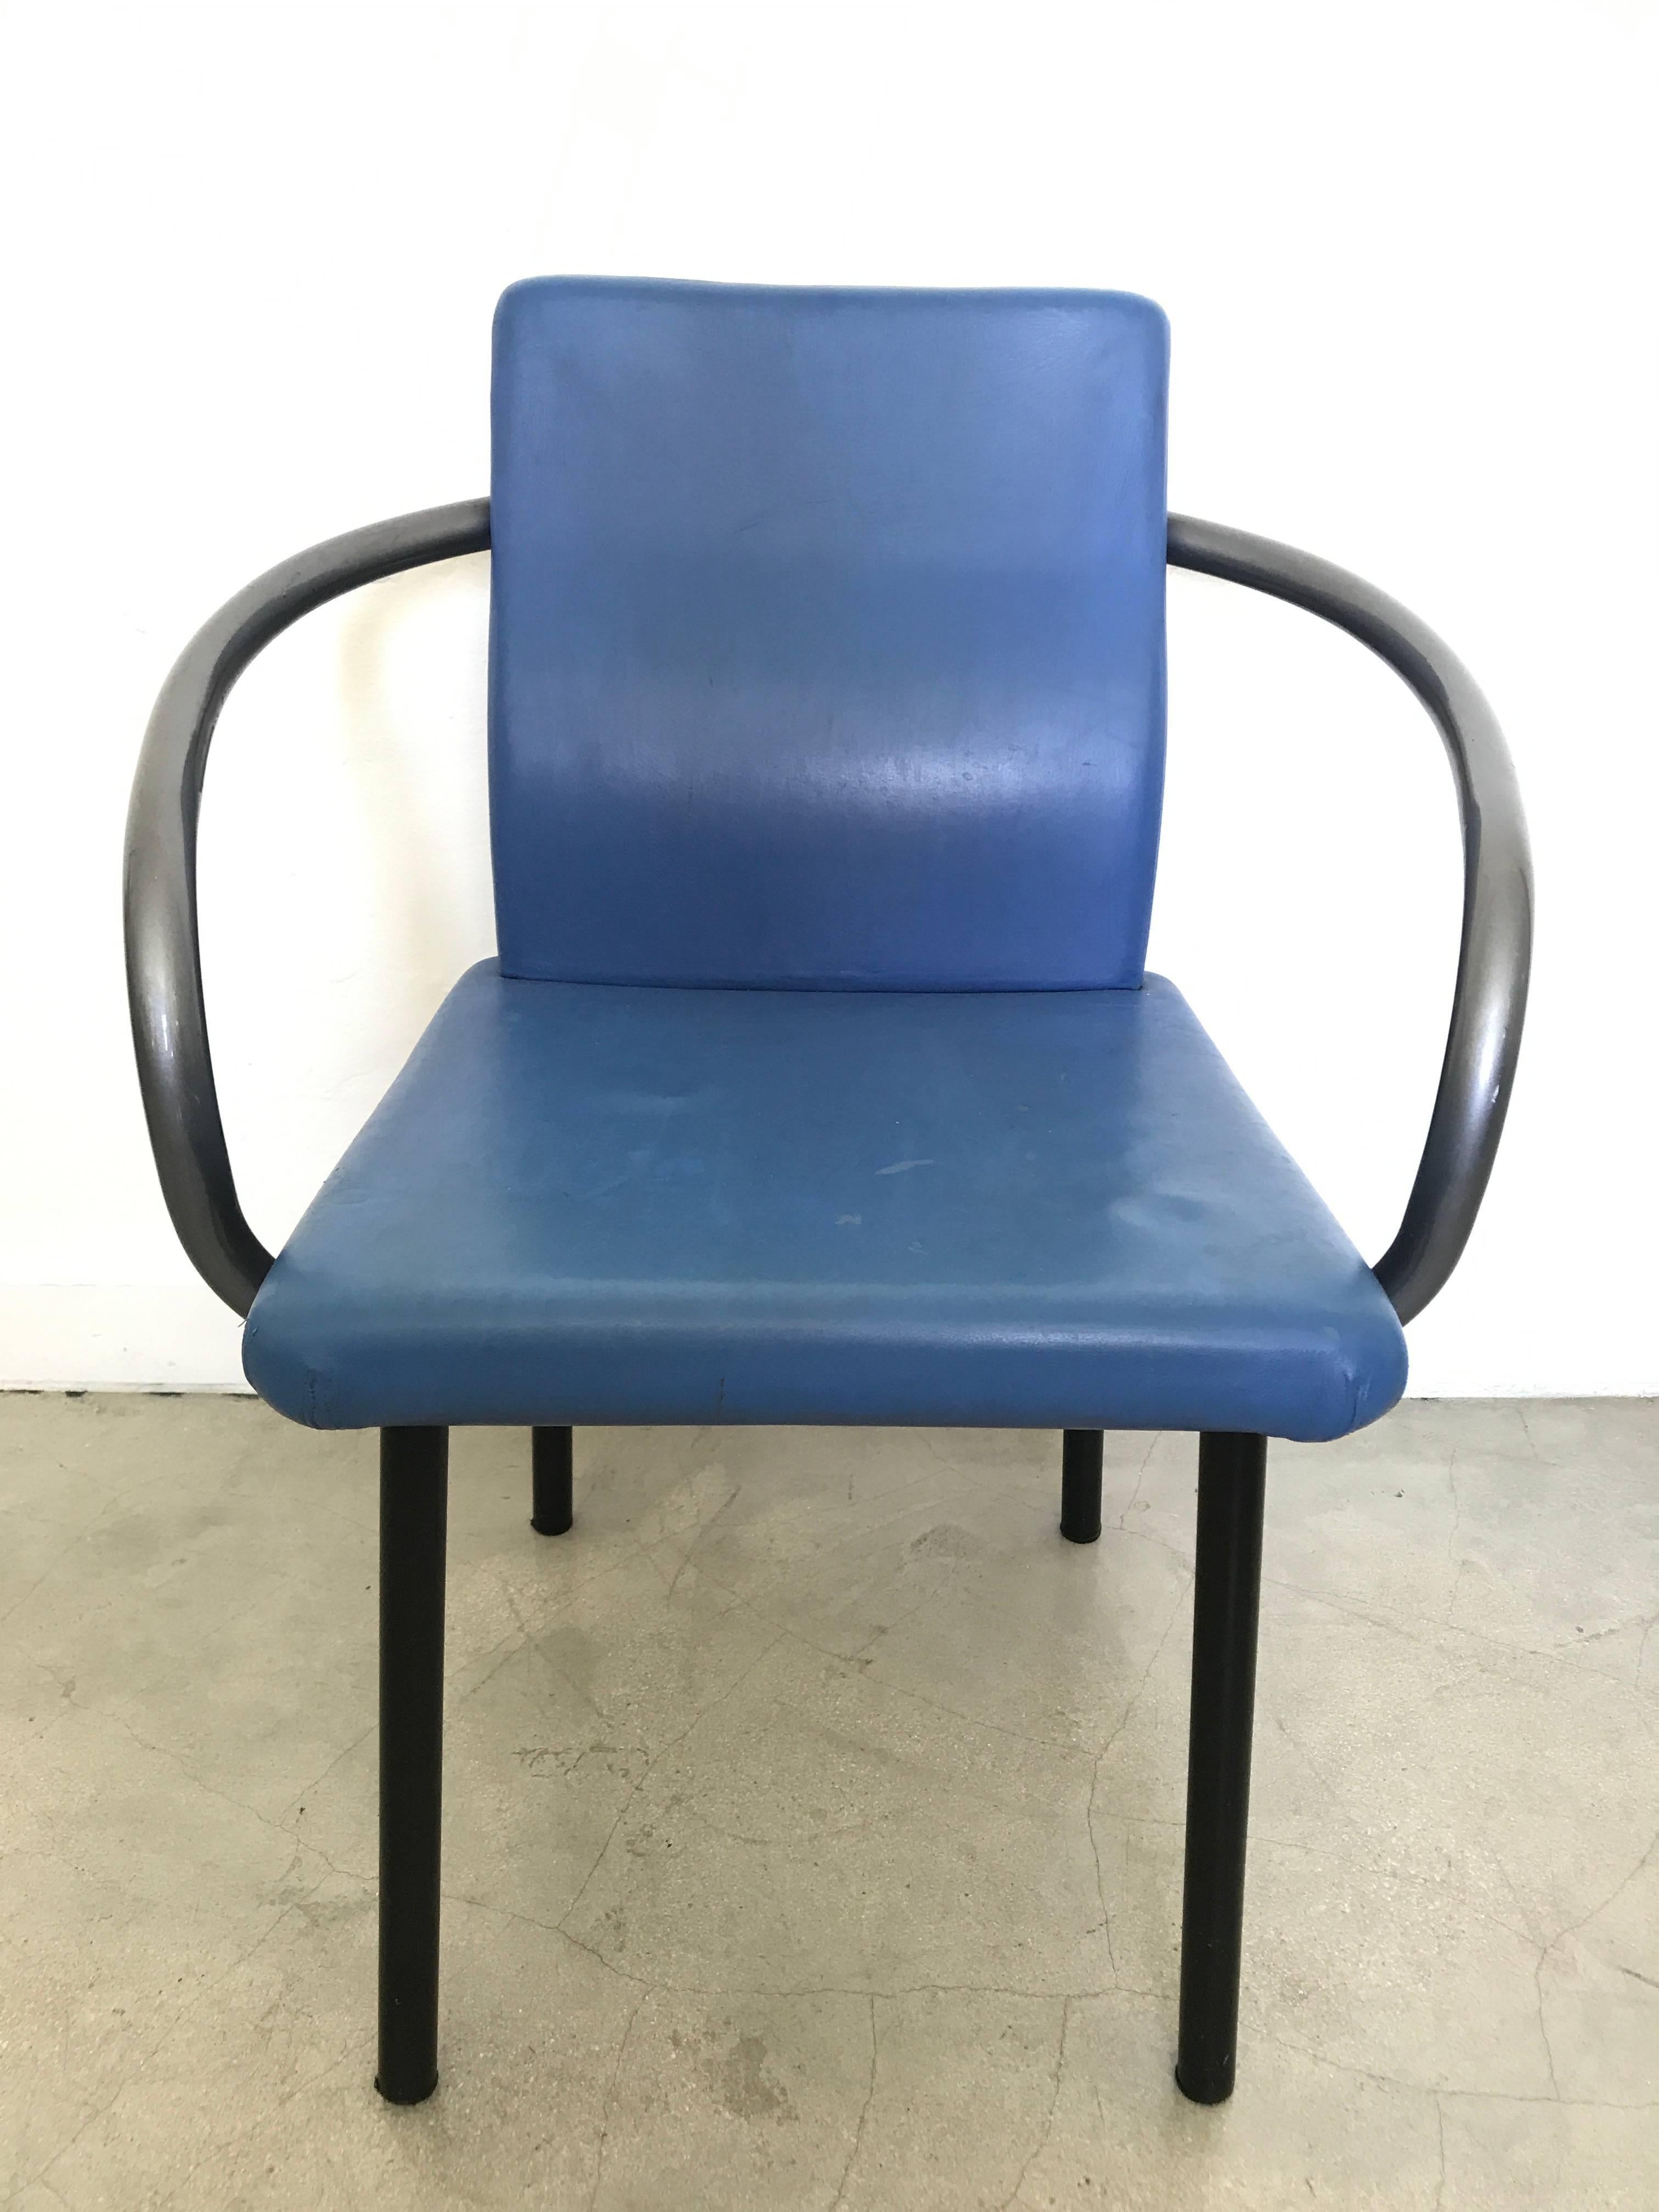 Iconic Postmodern Mandarin chair designed by Ettore Sottsass for Knoll in 1986, with black enameled steel legs, gray enameled steel arms, and painted blue leather seat and back.